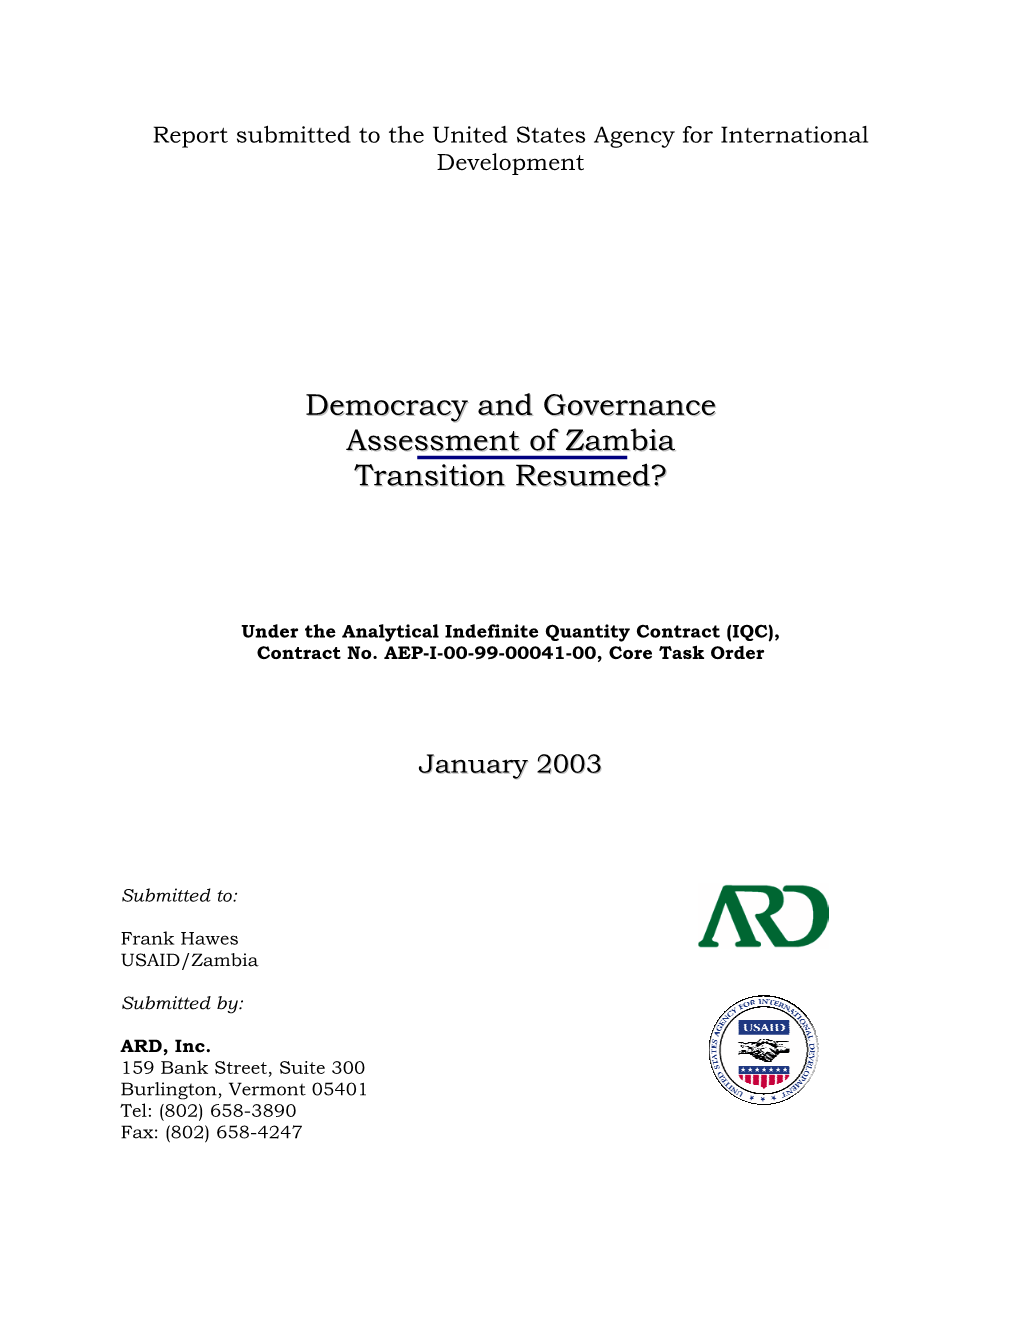 Democracy and Governance Assessment of Zambia Transition Resumed?